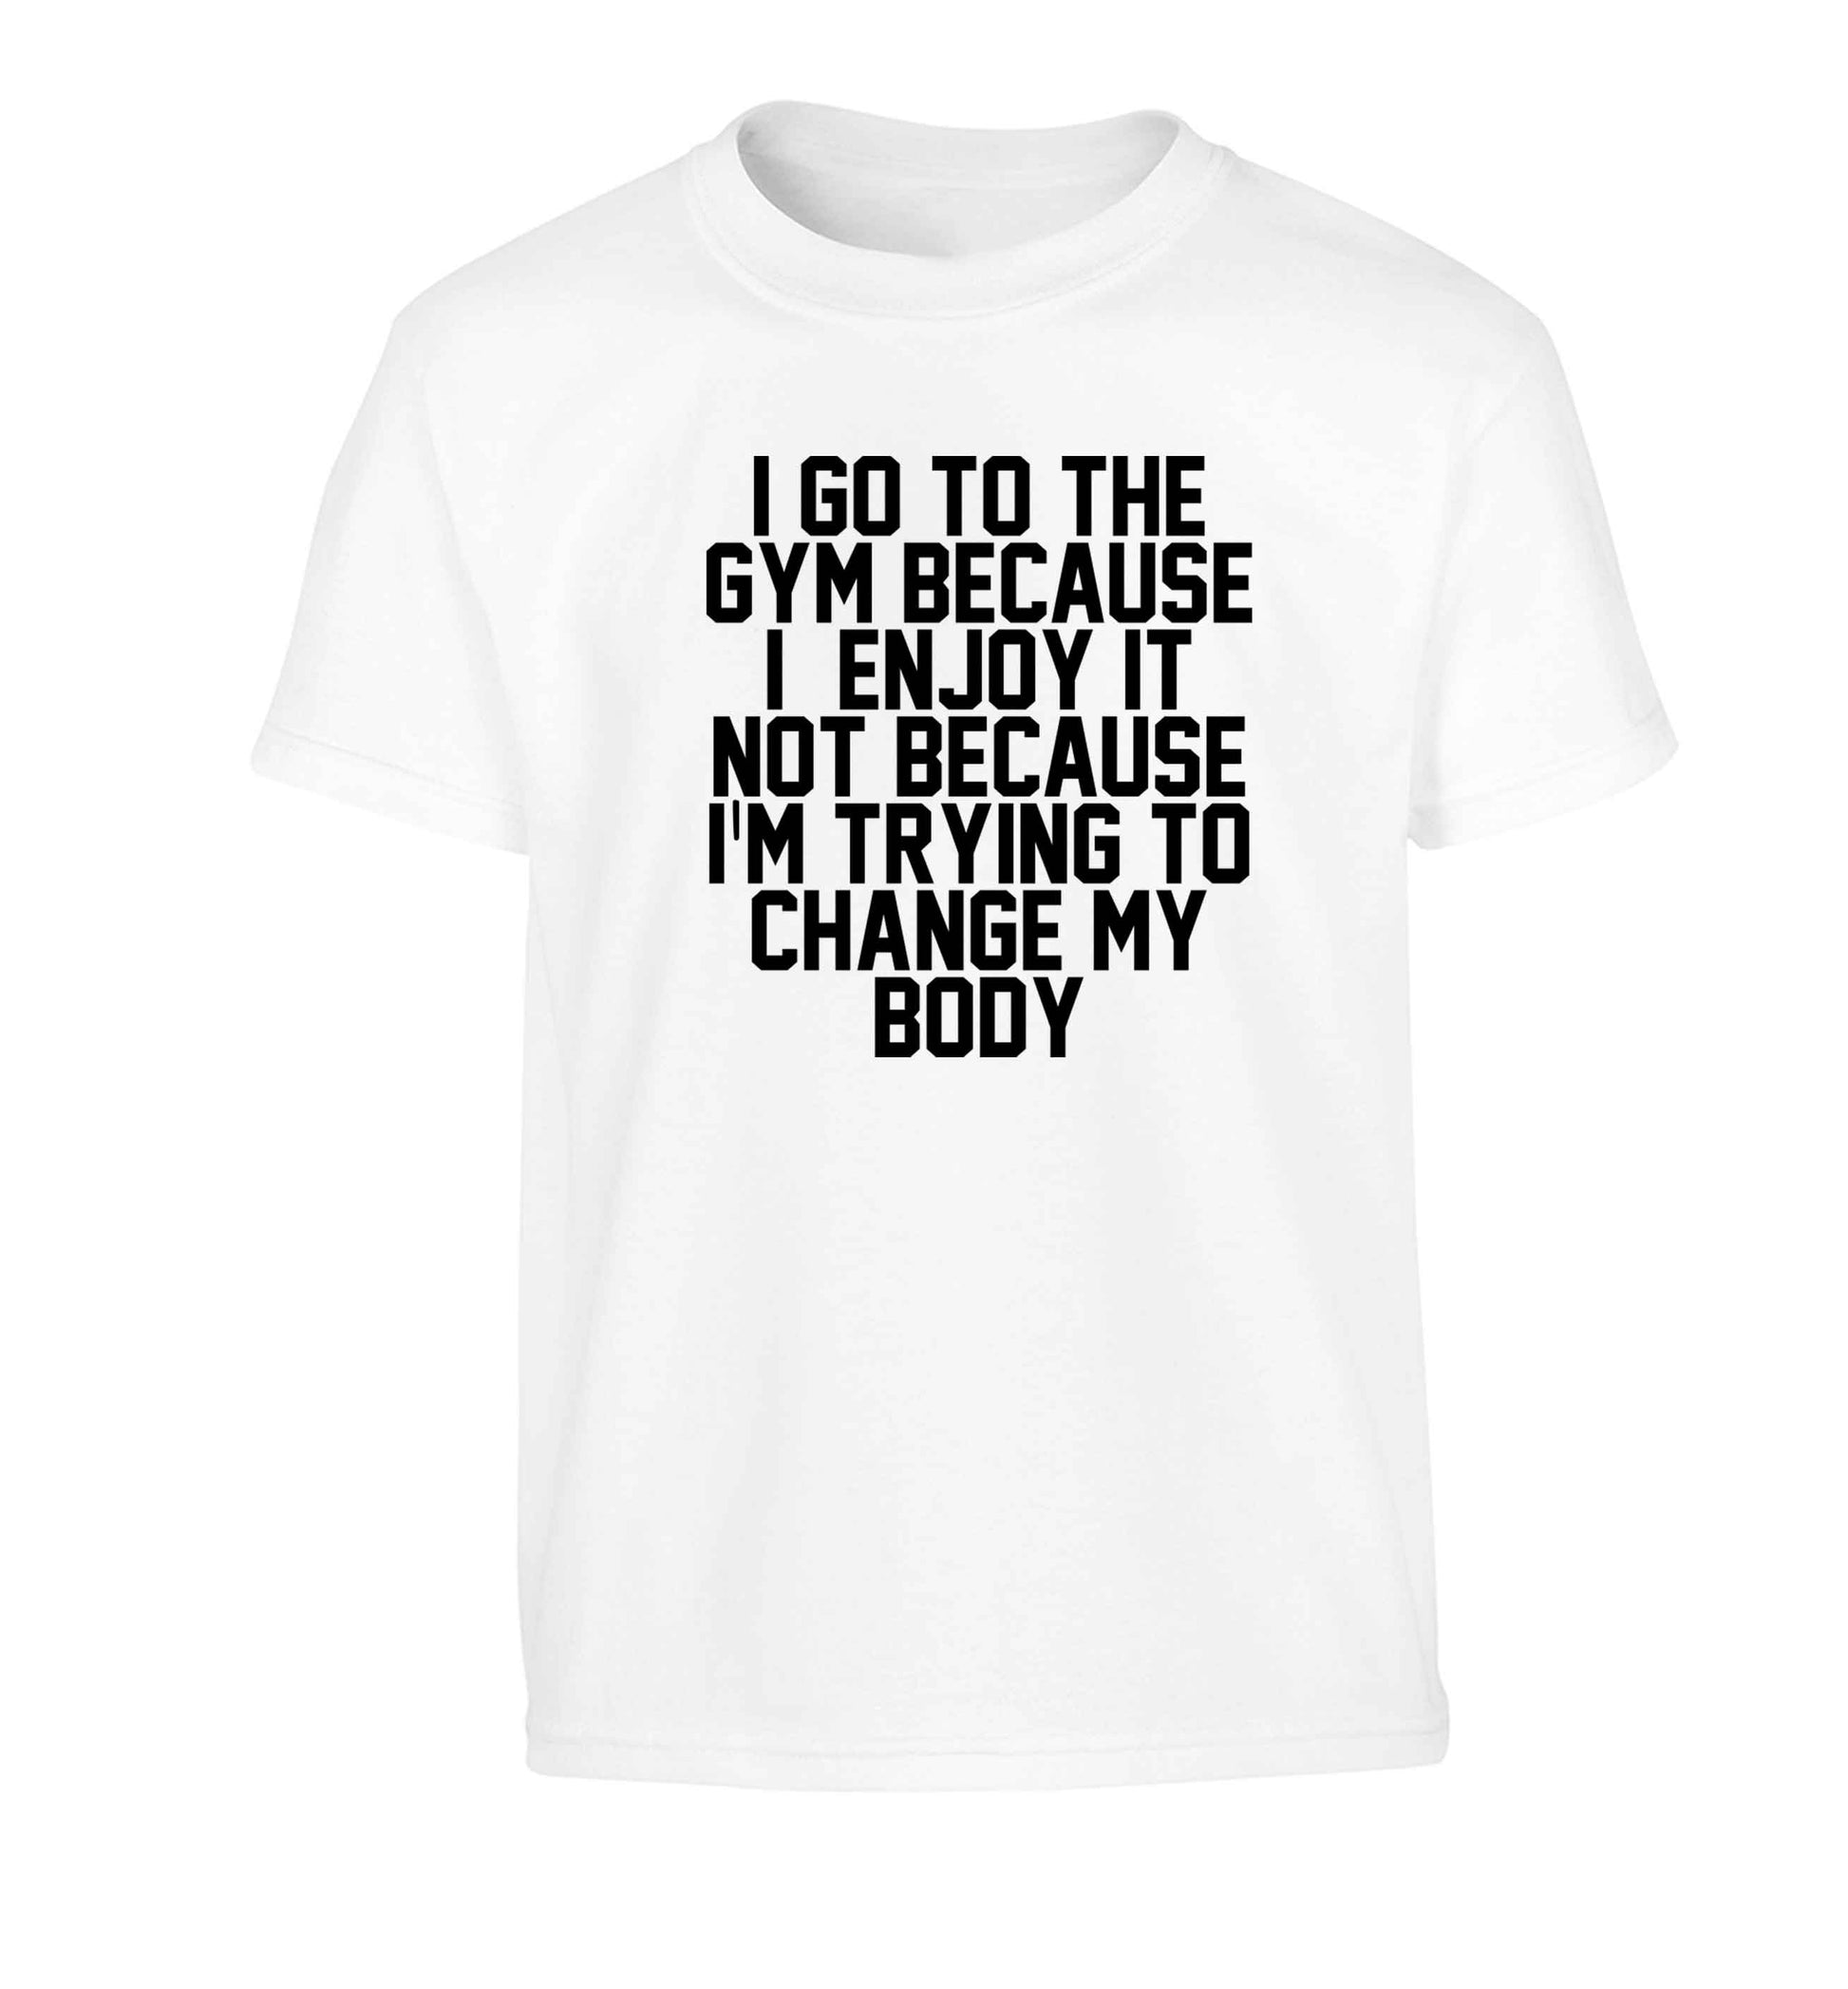 I go to the gym because I enjoy it not because I'm trying to change my body Children's white Tshirt 12-13 Years